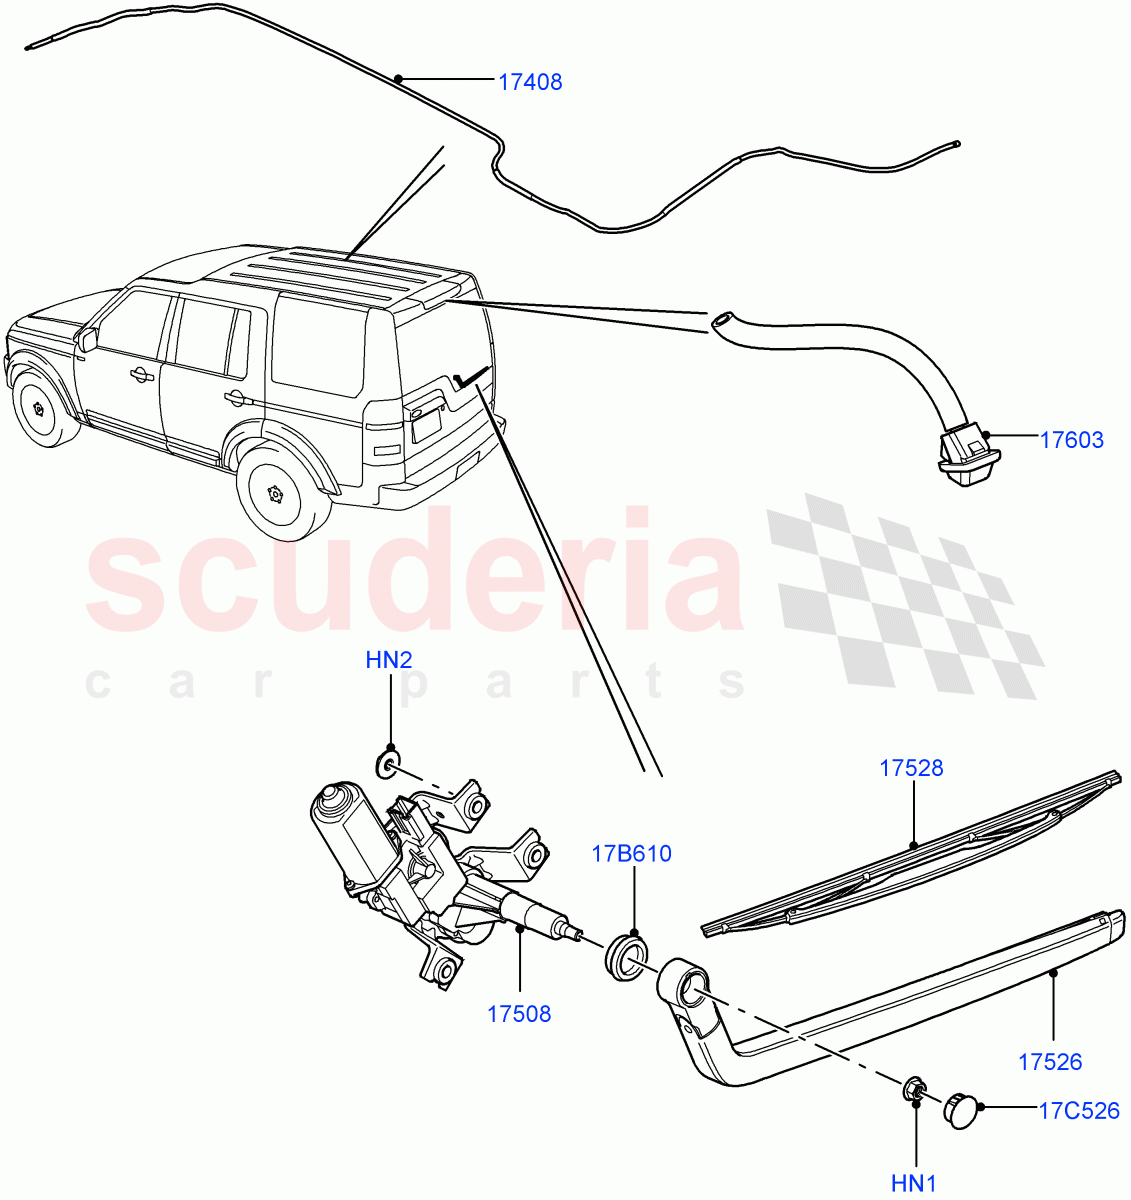 Rear Window Wiper And Washer((V)FROMAA000001) of Land Rover Land Rover Discovery 4 (2010-2016) [5.0 OHC SGDI NA V8 Petrol]